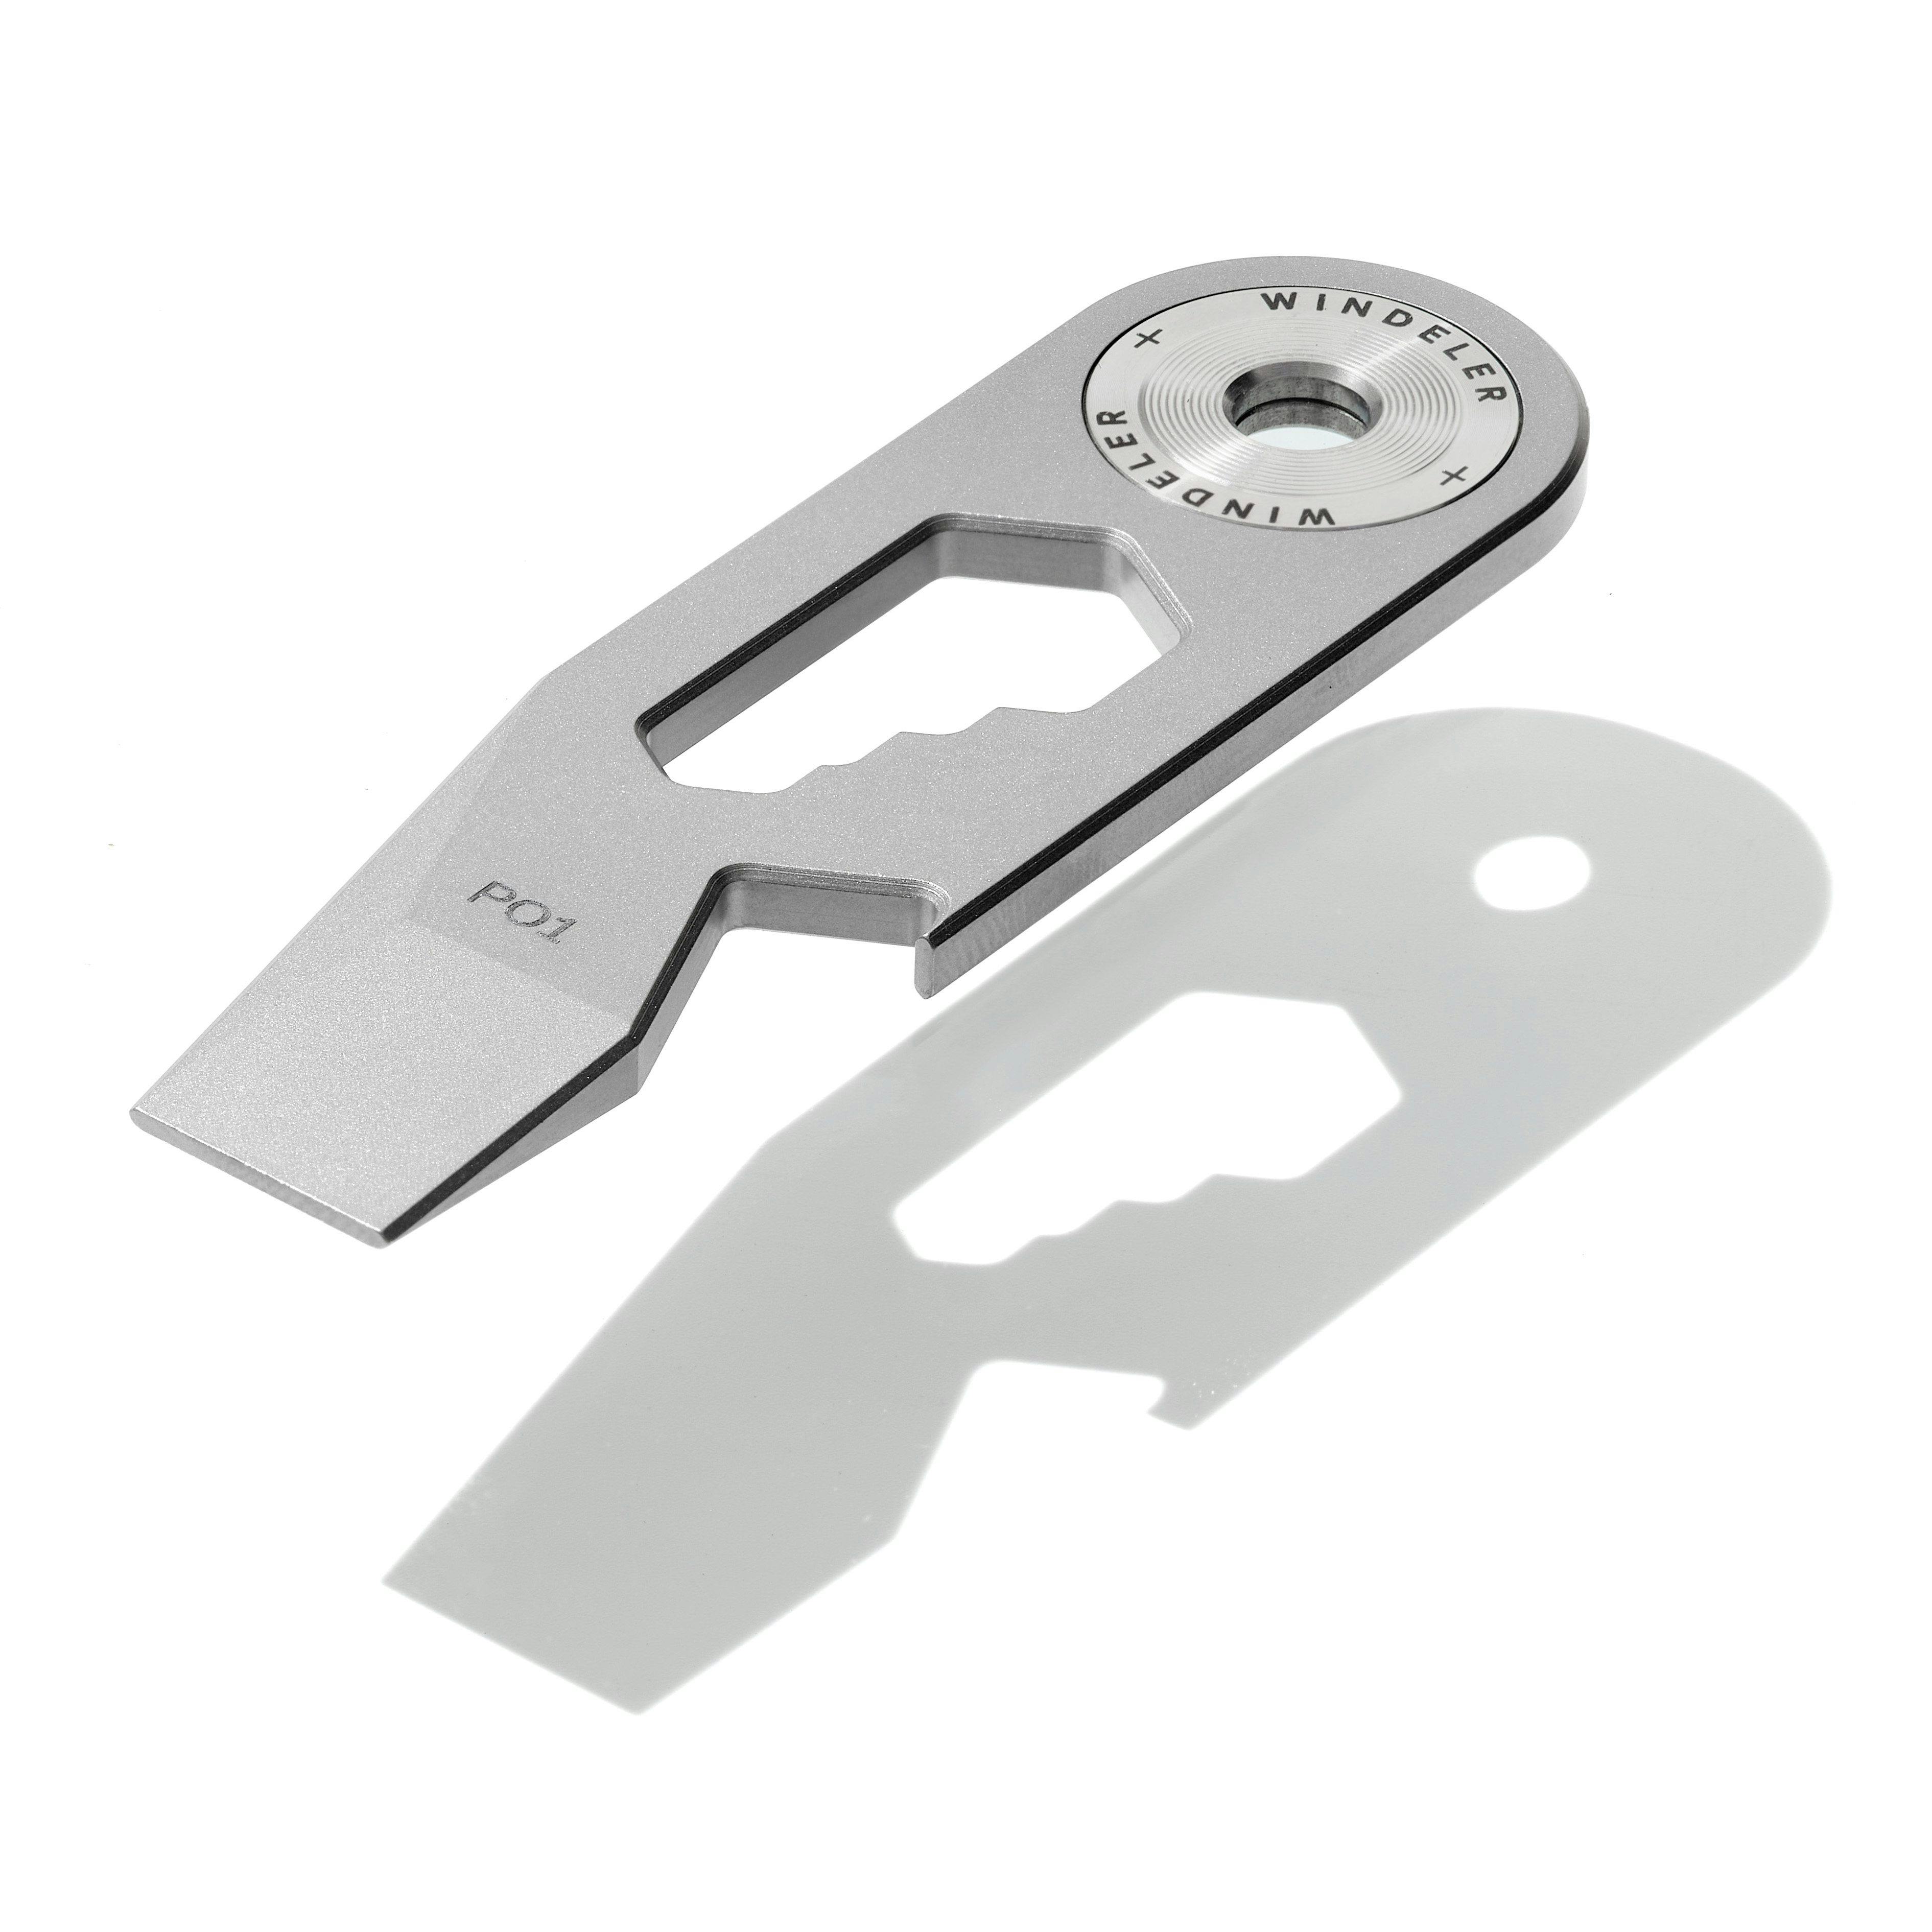 Promotional Magnetic Stainless Steel Bottle Openers